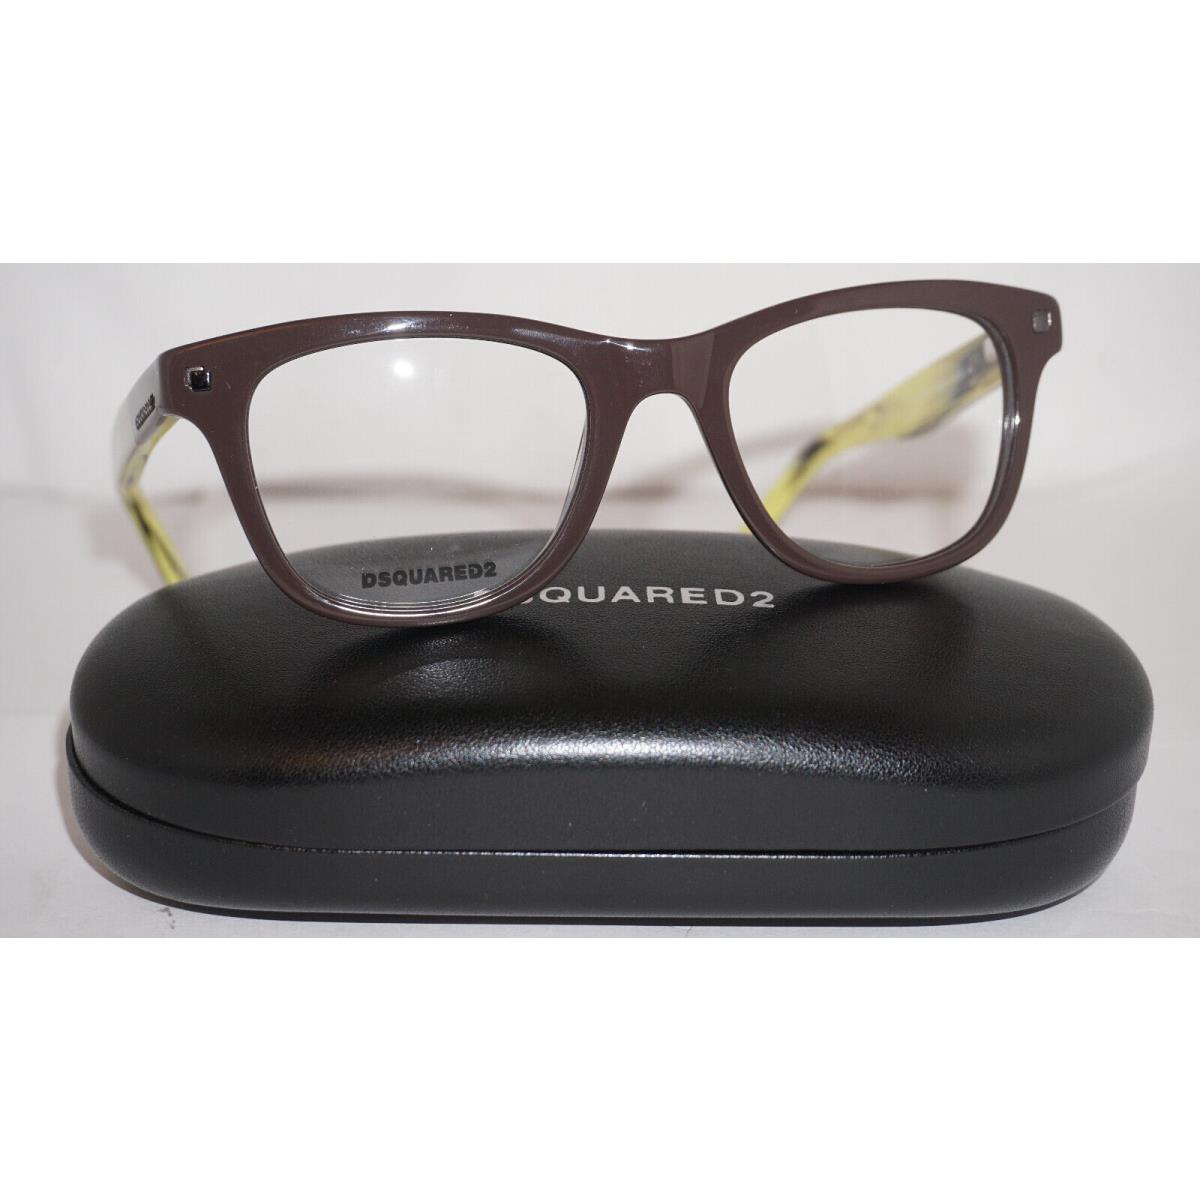 DSQUARED2 Eyeglasses Brown Yellow DQ5167 048 51 20 145